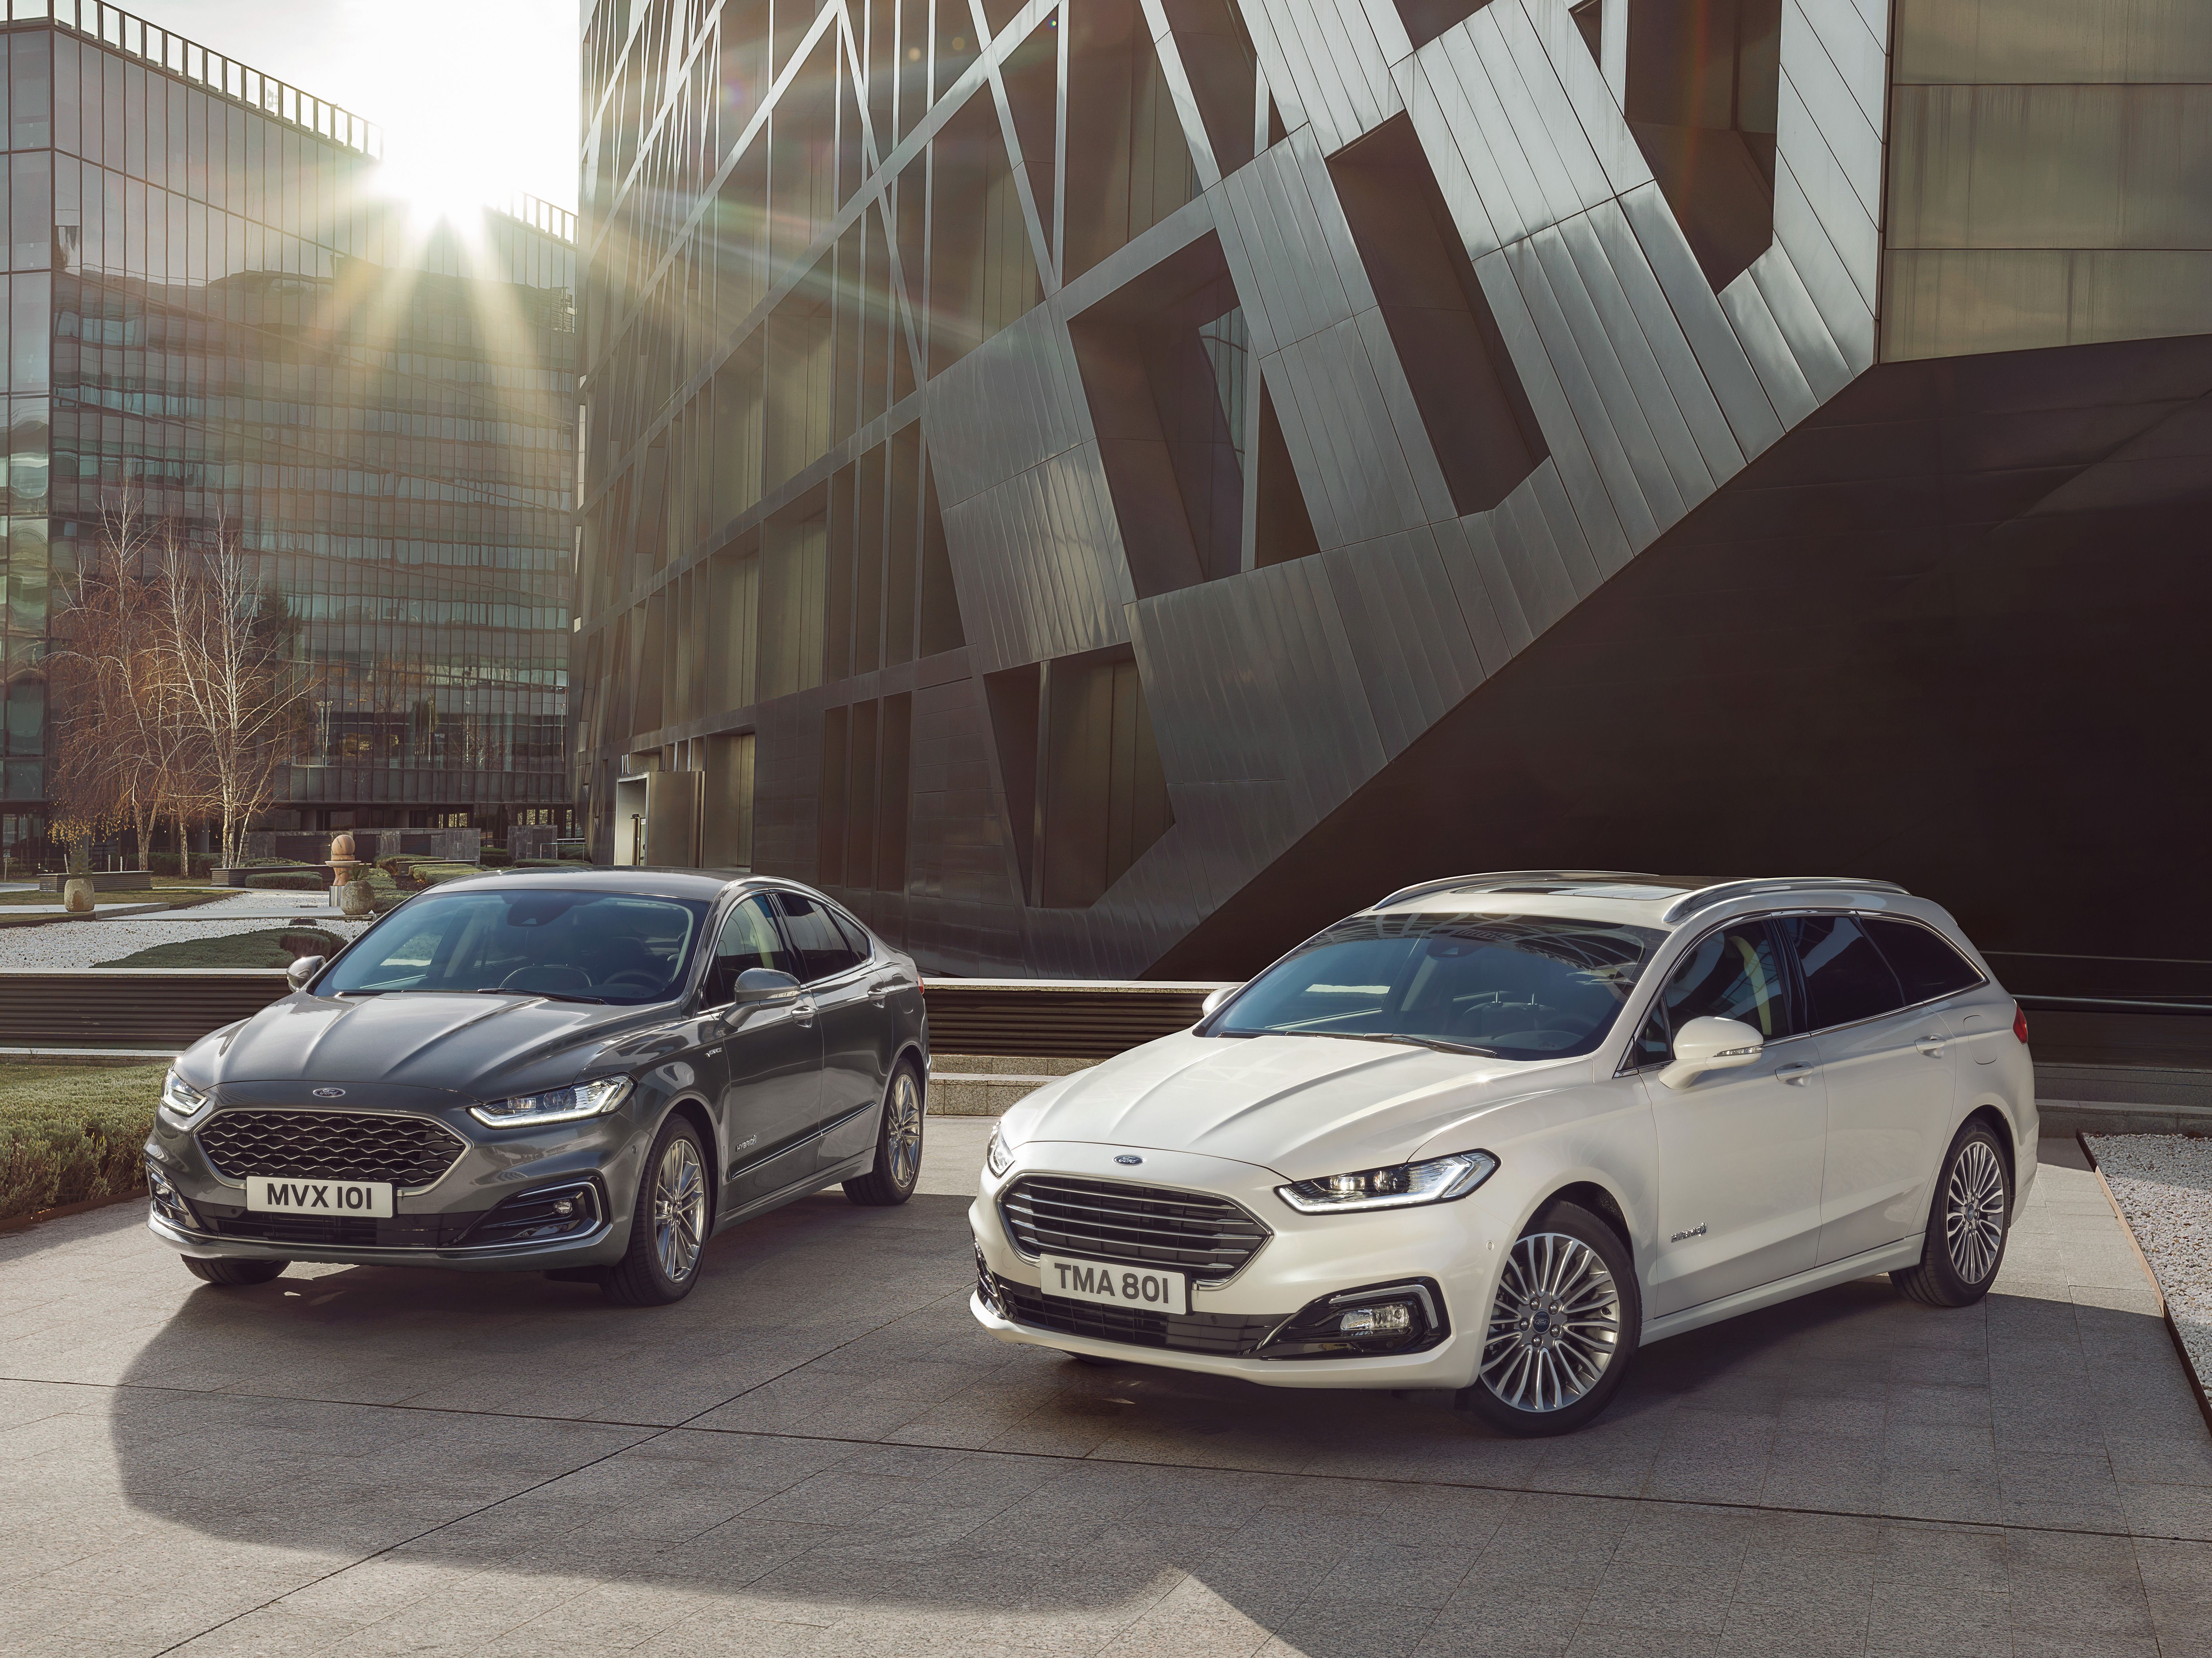 1997 The 2019 Ford Mondeo Has Arrived In Belgium and it Brought Along a New First For the Blue Oval